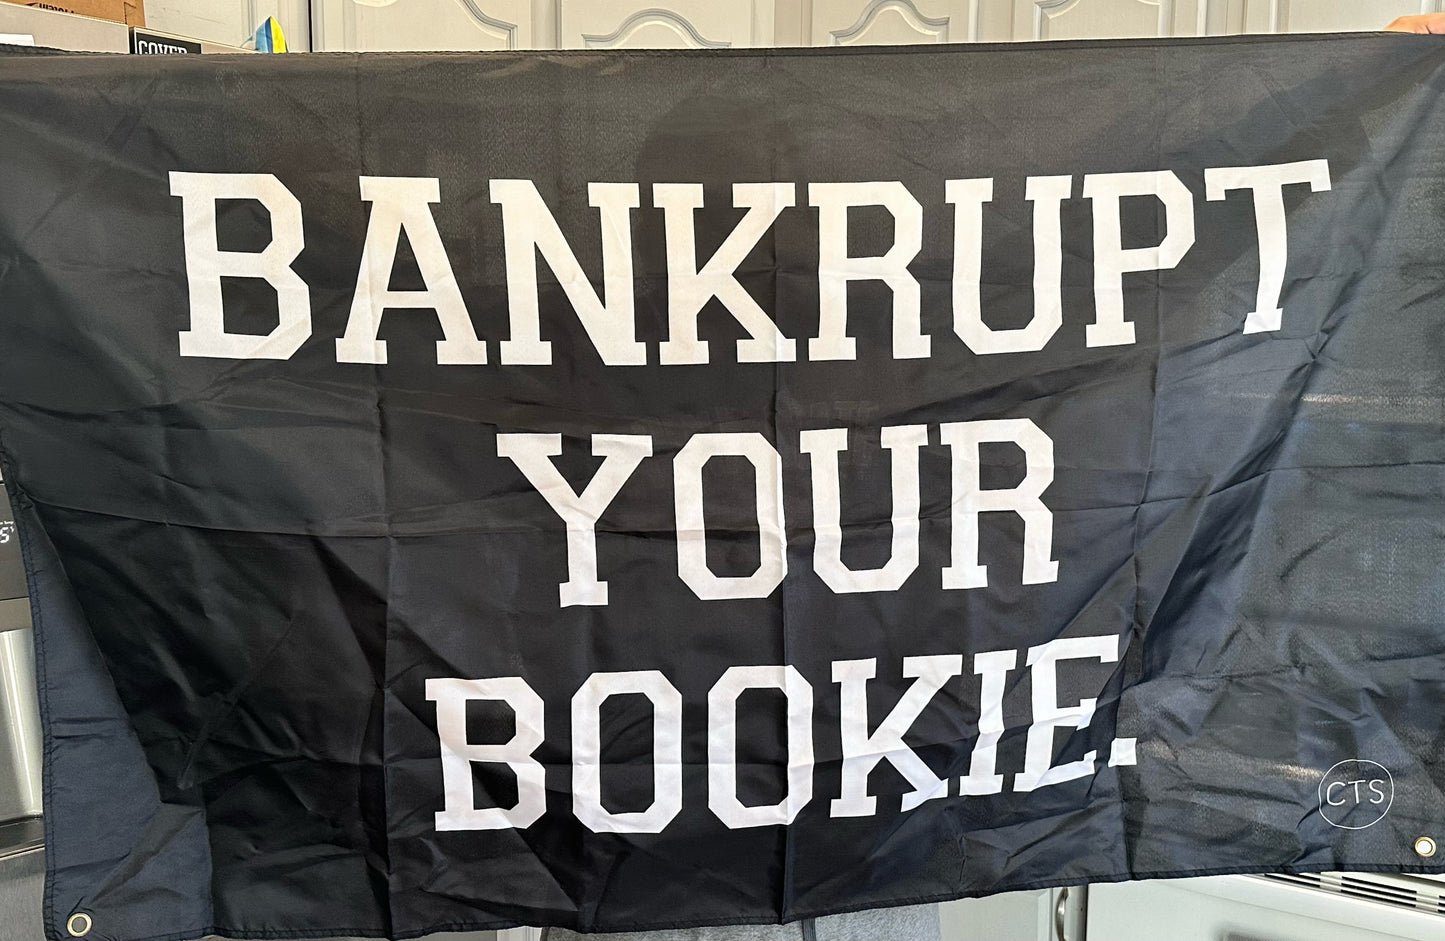 Bankrupt Your Bookie Flag